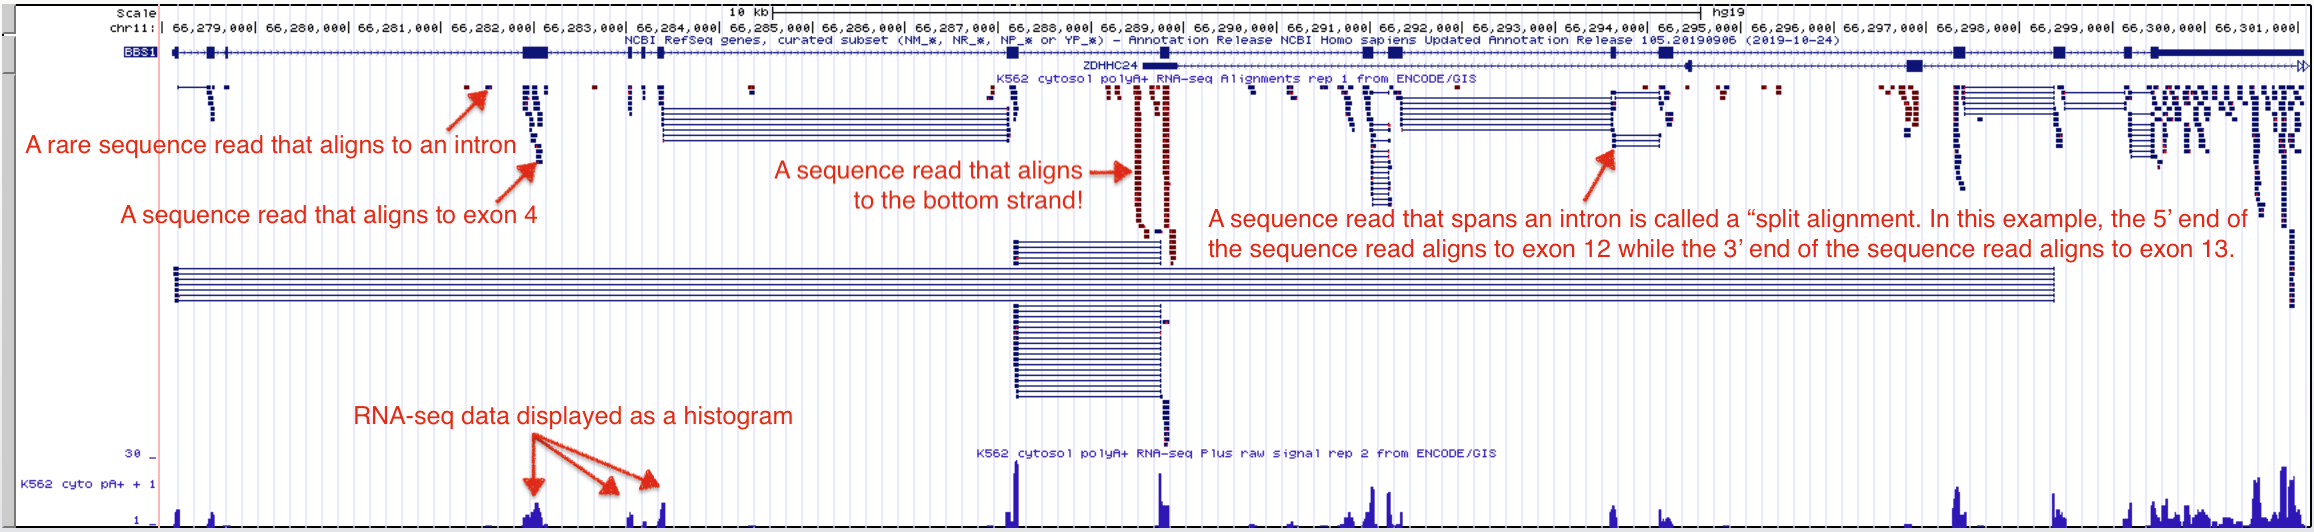 The Encode evidence track here shows high throughput sequencing of RNA samples from the K562 immortal cell line. The Alignment view on top shows where the sequence reads align to the genome including alignments that map to a single exon and *split alignments* that are interrupted by an intron. Sequences determined to be transcribed on the positive strand are shown in blue. Sequences determined to be transcribed on the negative strand are shown in red. Click on the image to enlarge.